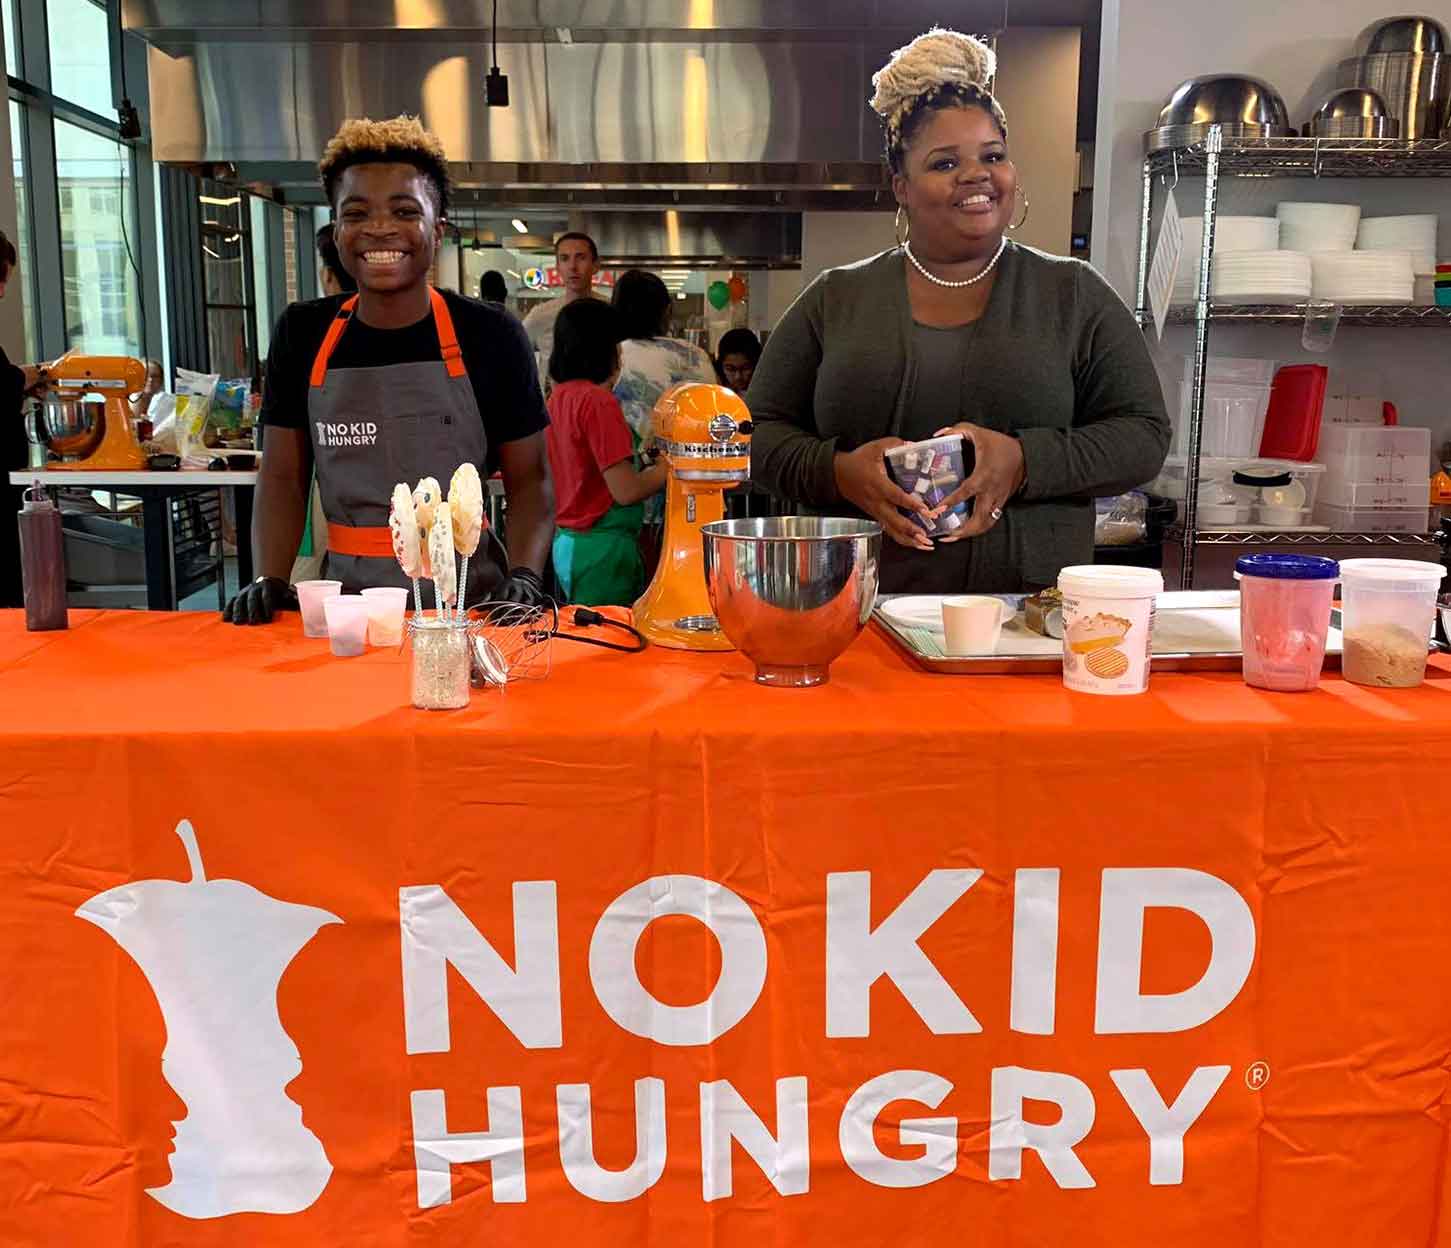 A teen and a woman stand at a table with a No Kid Hungry tablecloth and baking equipment.